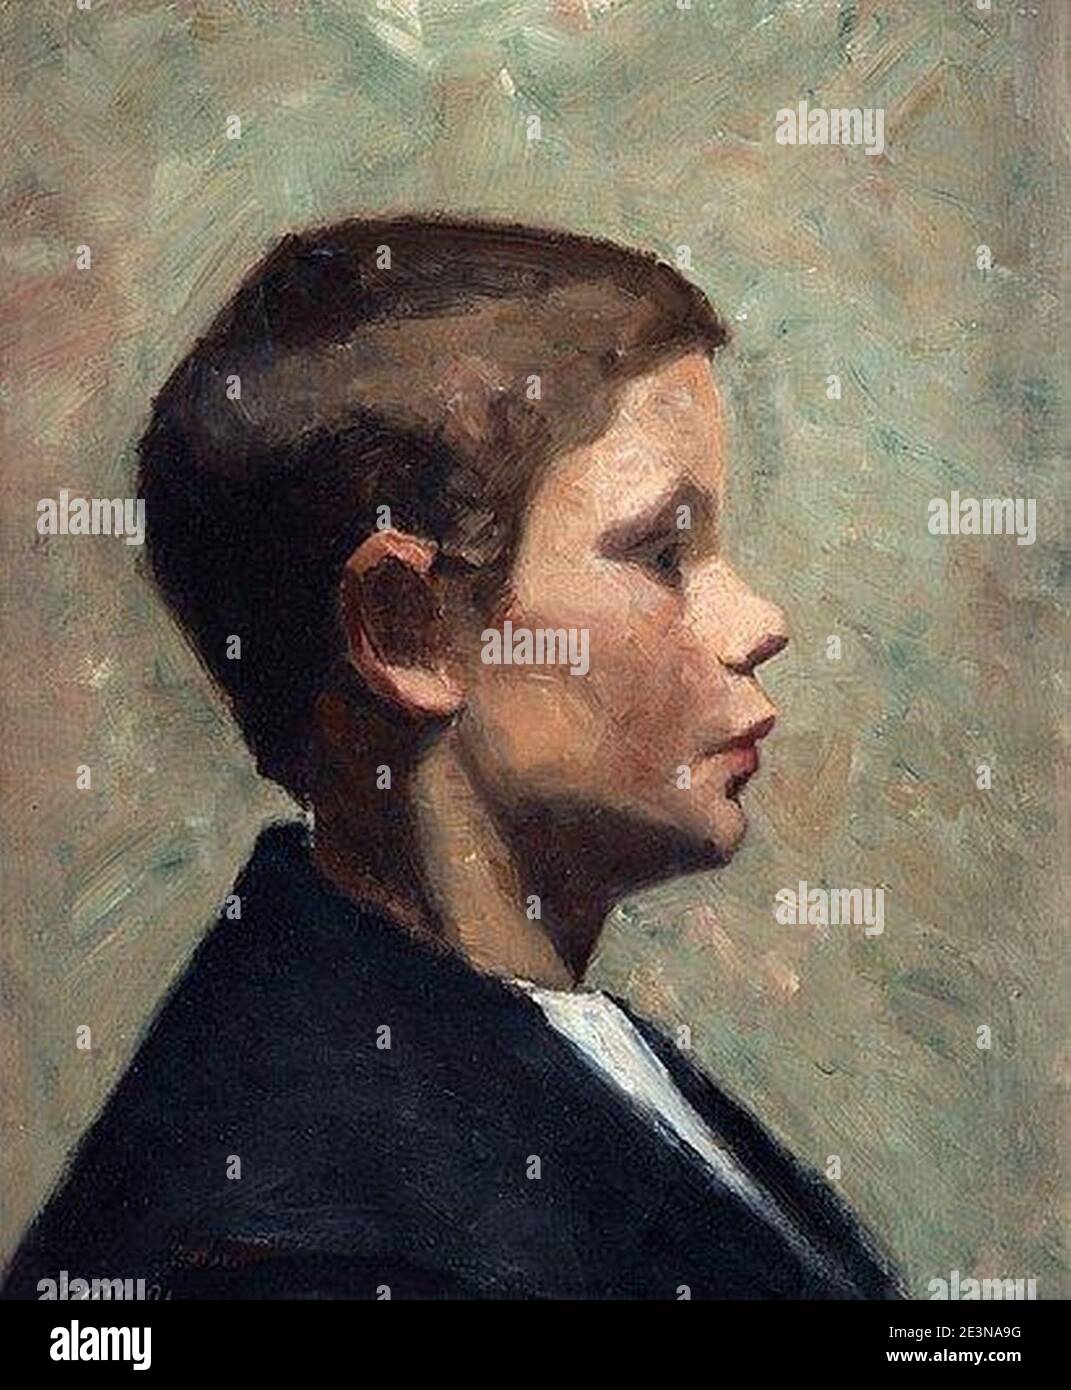 Marie Kroyer Young boy in profile. Stock Photo